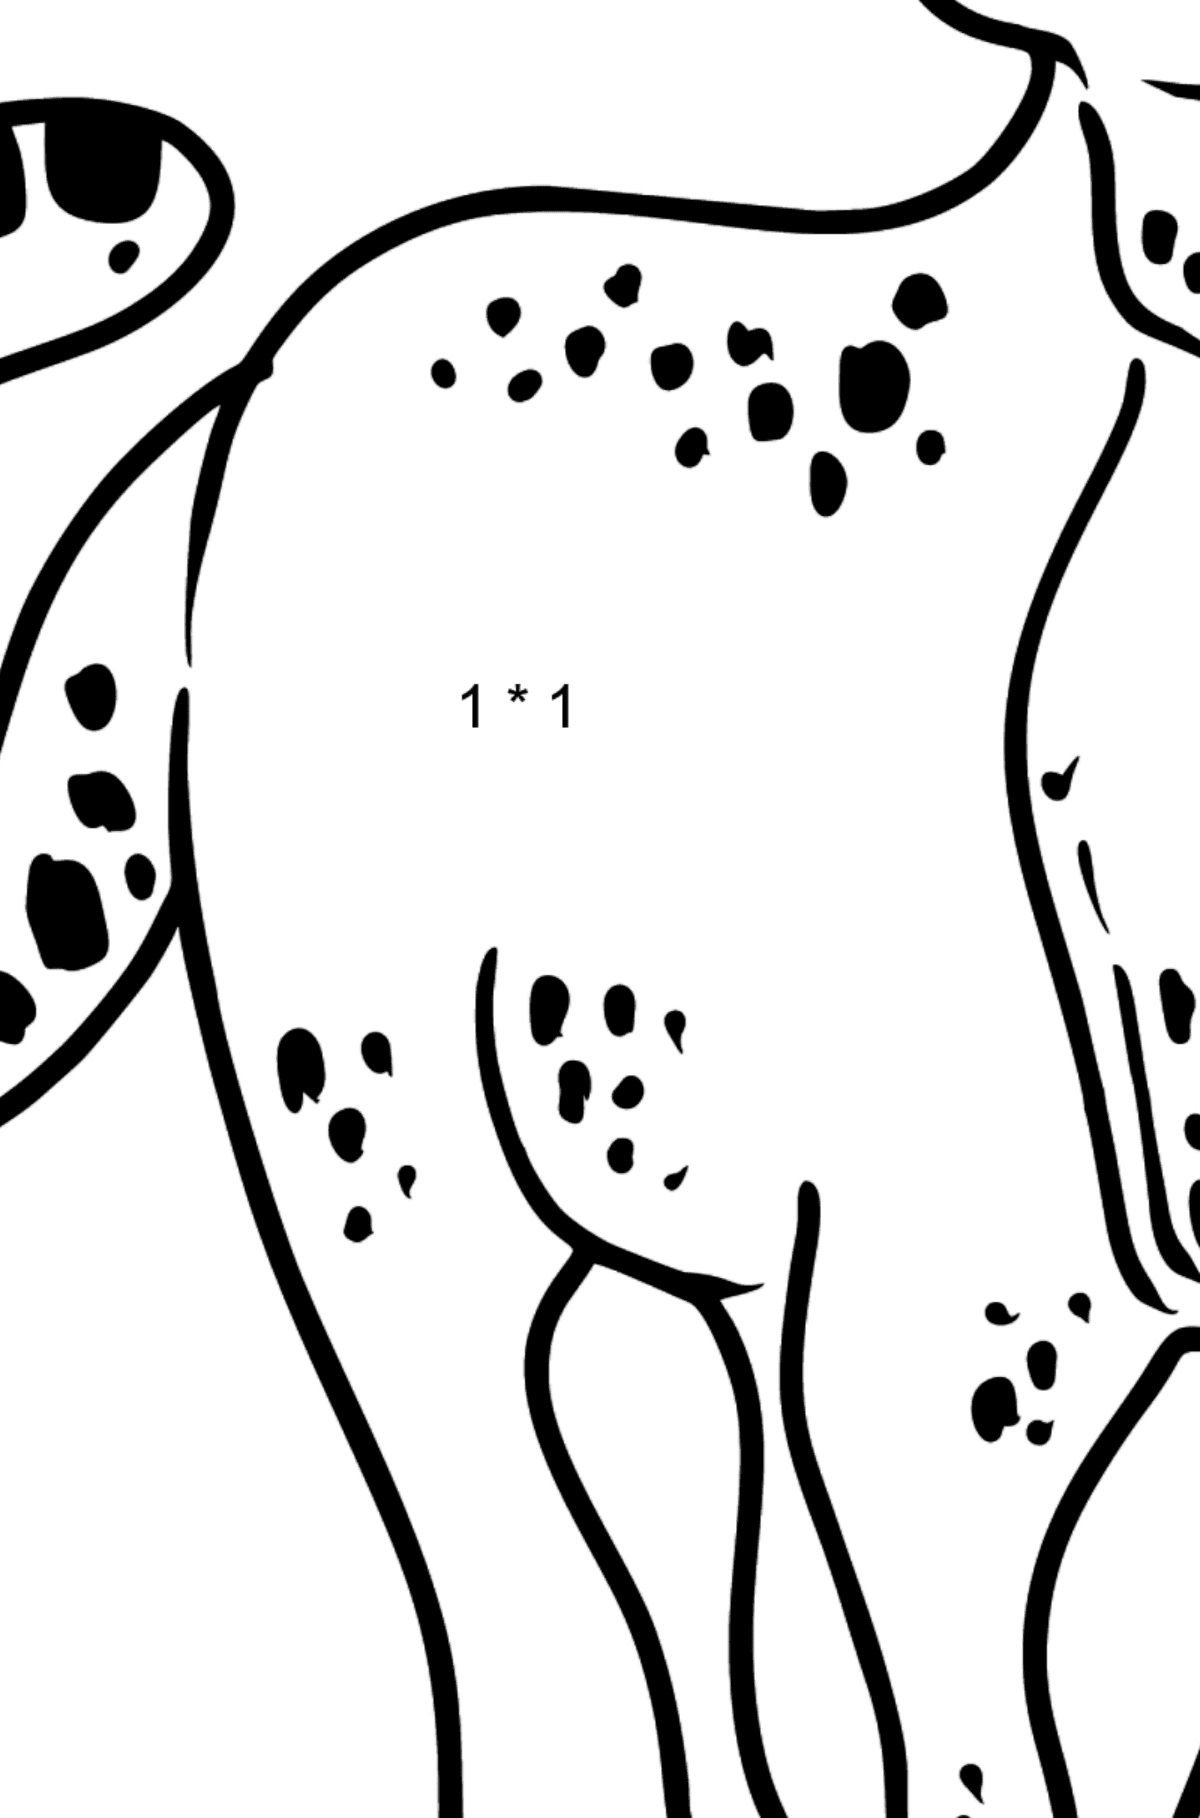 Leopard coloring page - Math Coloring - Multiplication for Kids